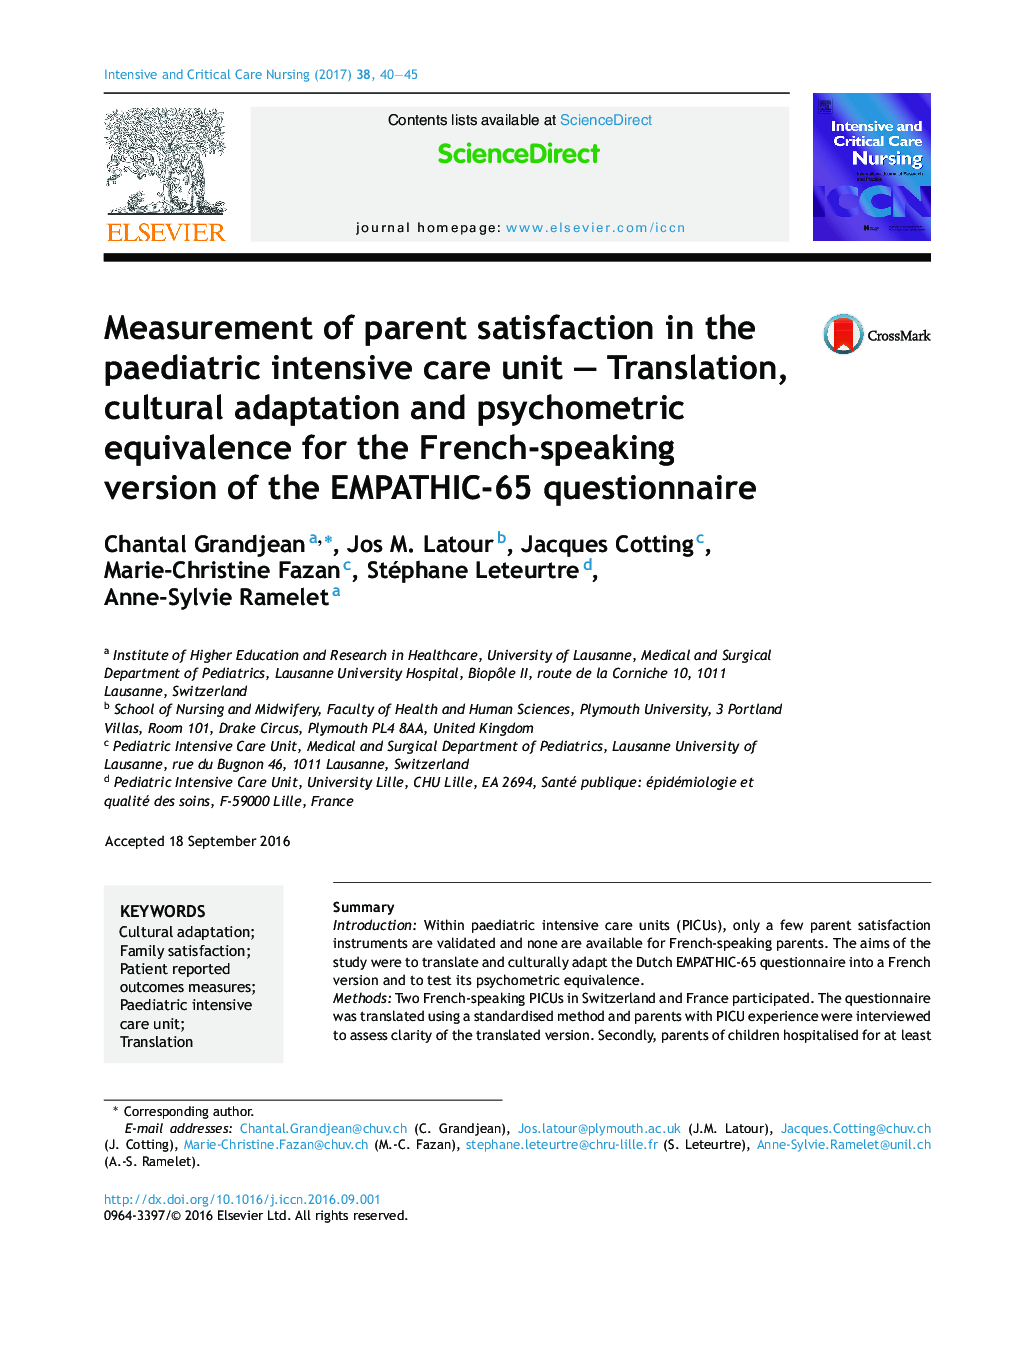 Measurement of parent satisfaction in the paediatric intensive care unit - Translation, cultural adaptation and psychometric equivalence for the French-speaking version of the EMPATHIC-65 questionnaire